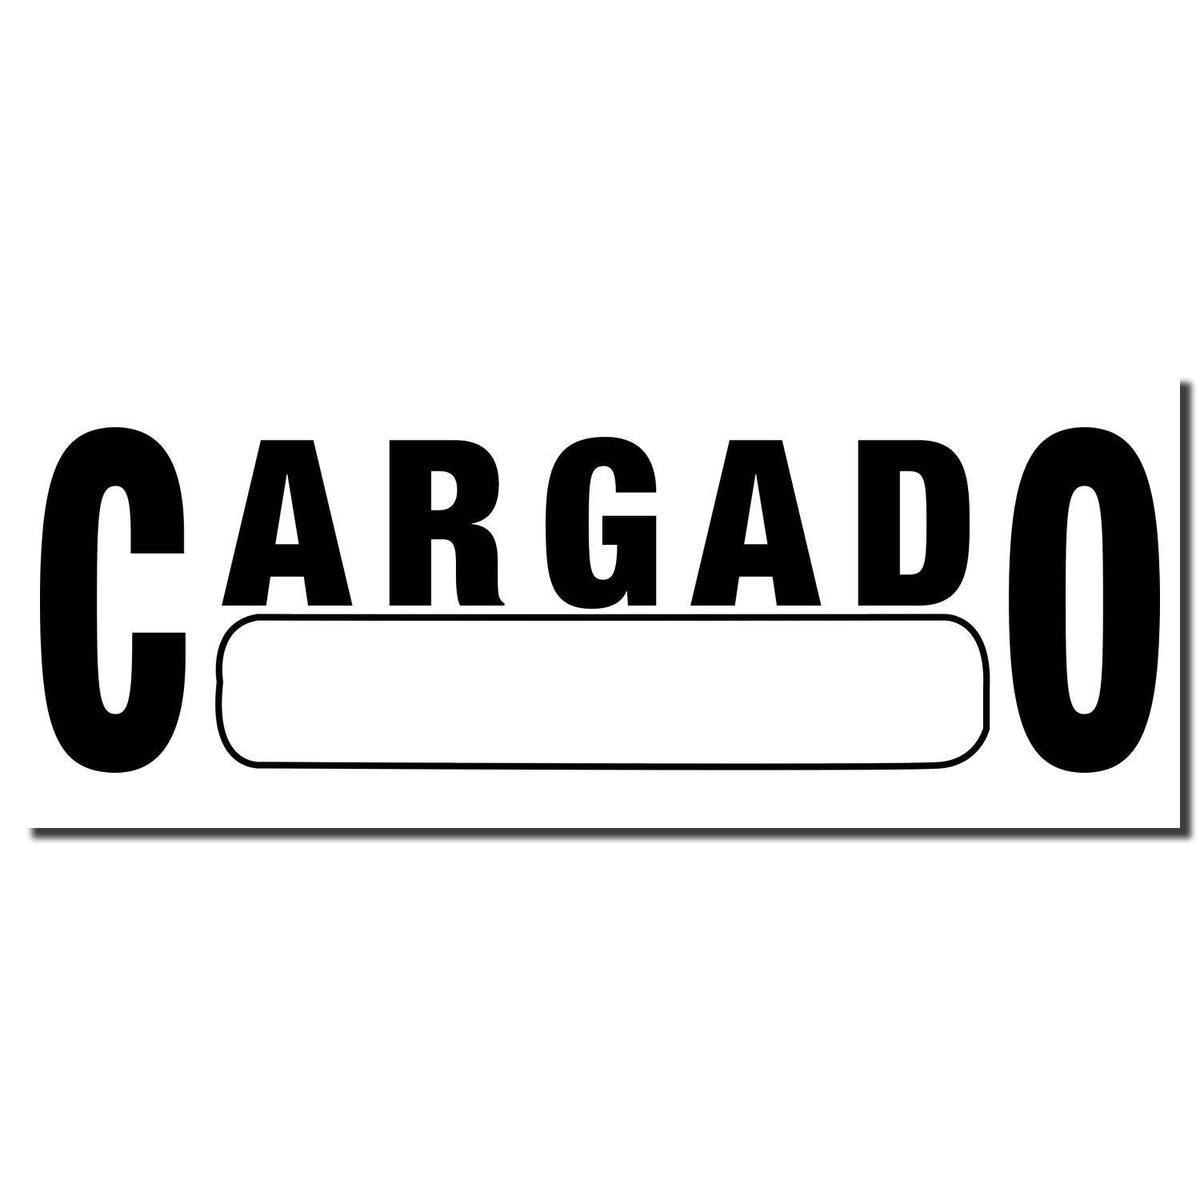 Self-Inking Cargado Stamp - Engineer Seal Stamps - Brand_Trodat, Impression Size_Small, Stamp Type_Self-Inking Stamp, Type of Use_Office, Type of Use_Postal &amp; Mailing